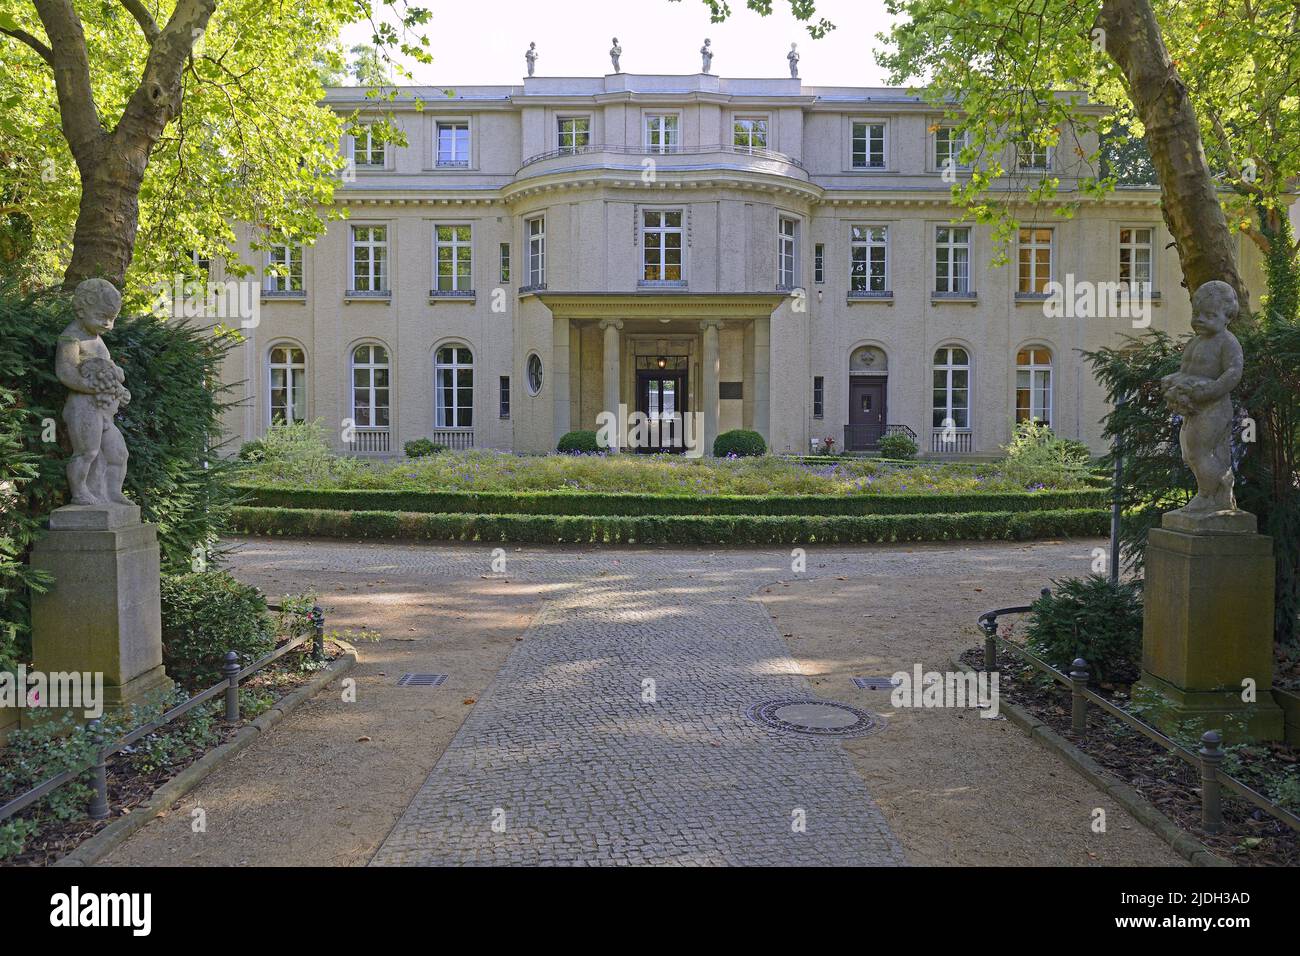 The villa Am Grossen Wannsee, Wannsee Conference, Germany, Berlin Stock Photo